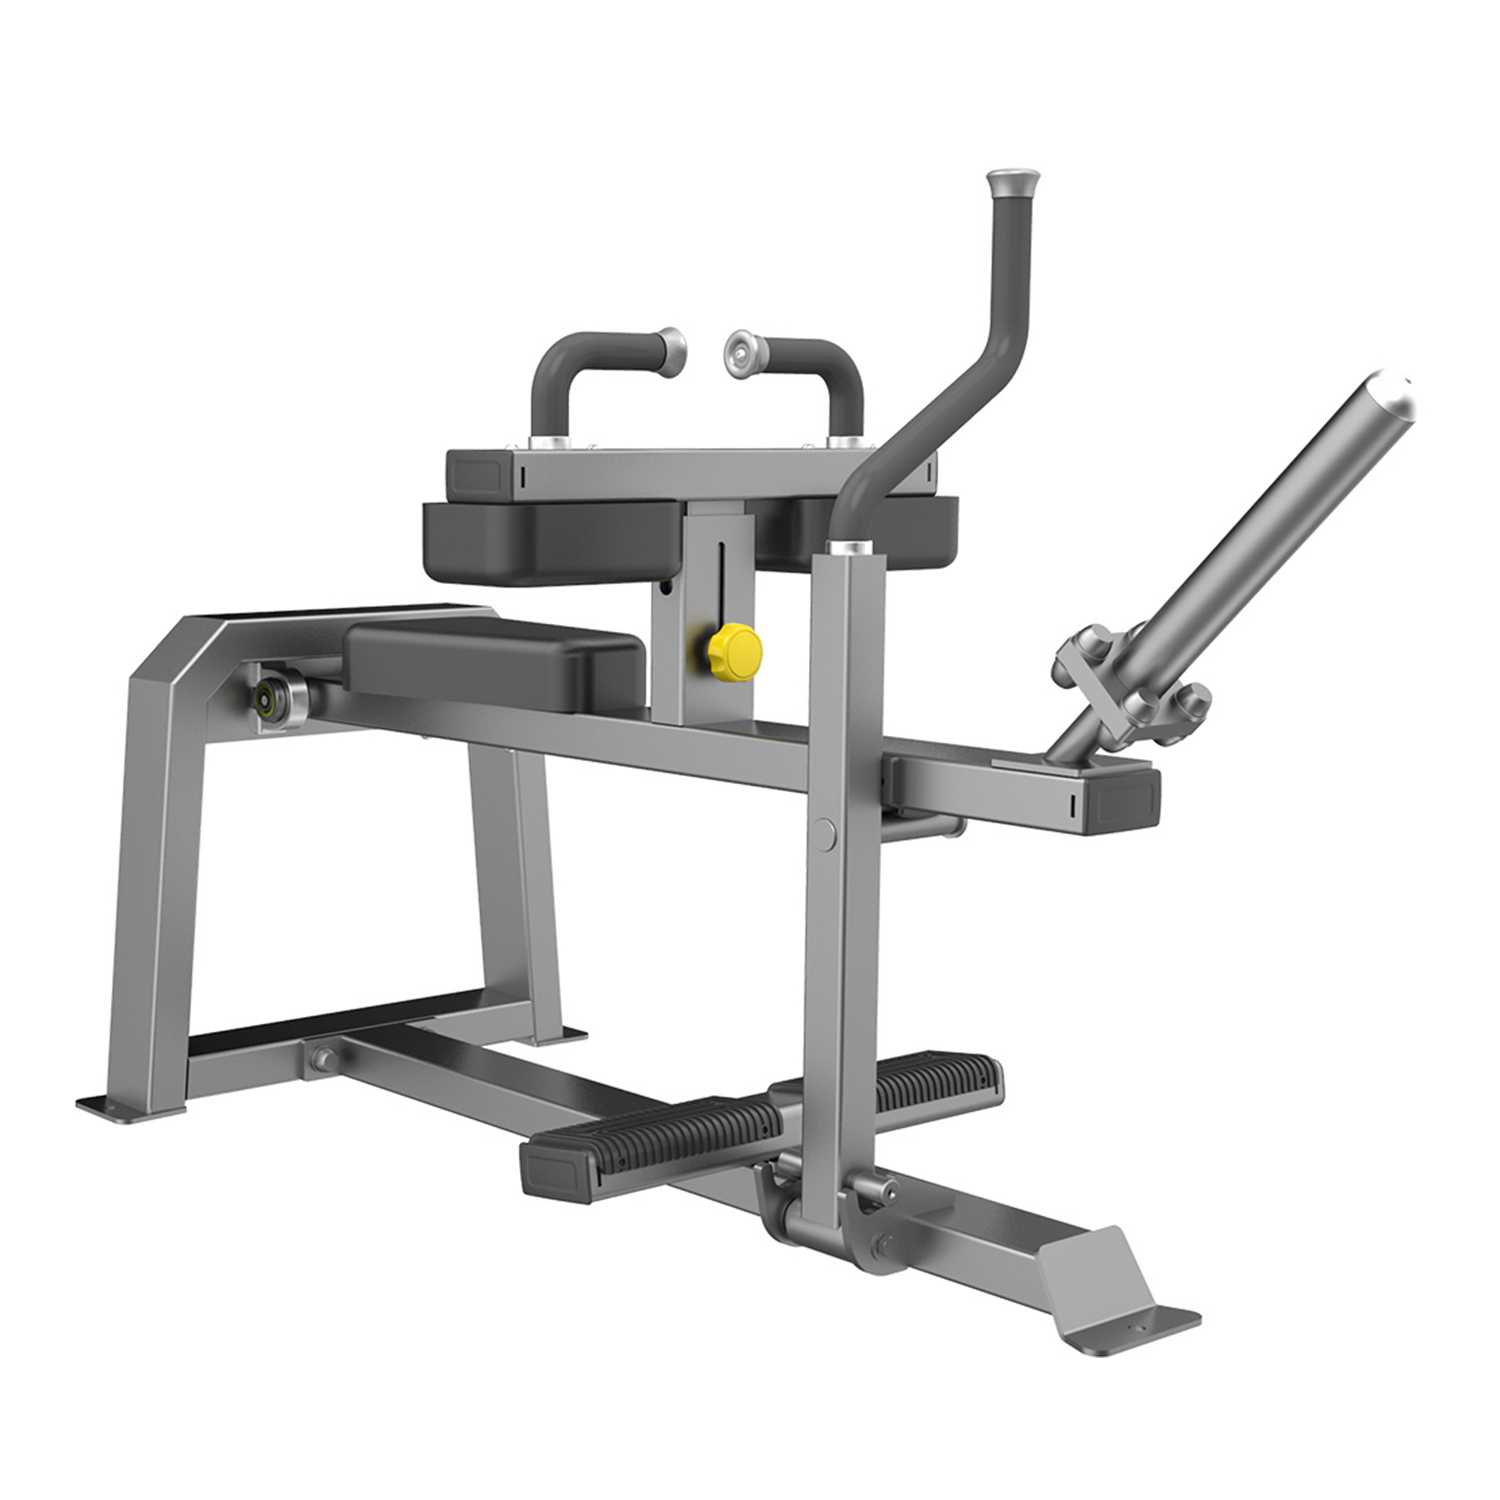 Dhz Fitness Seated Calf